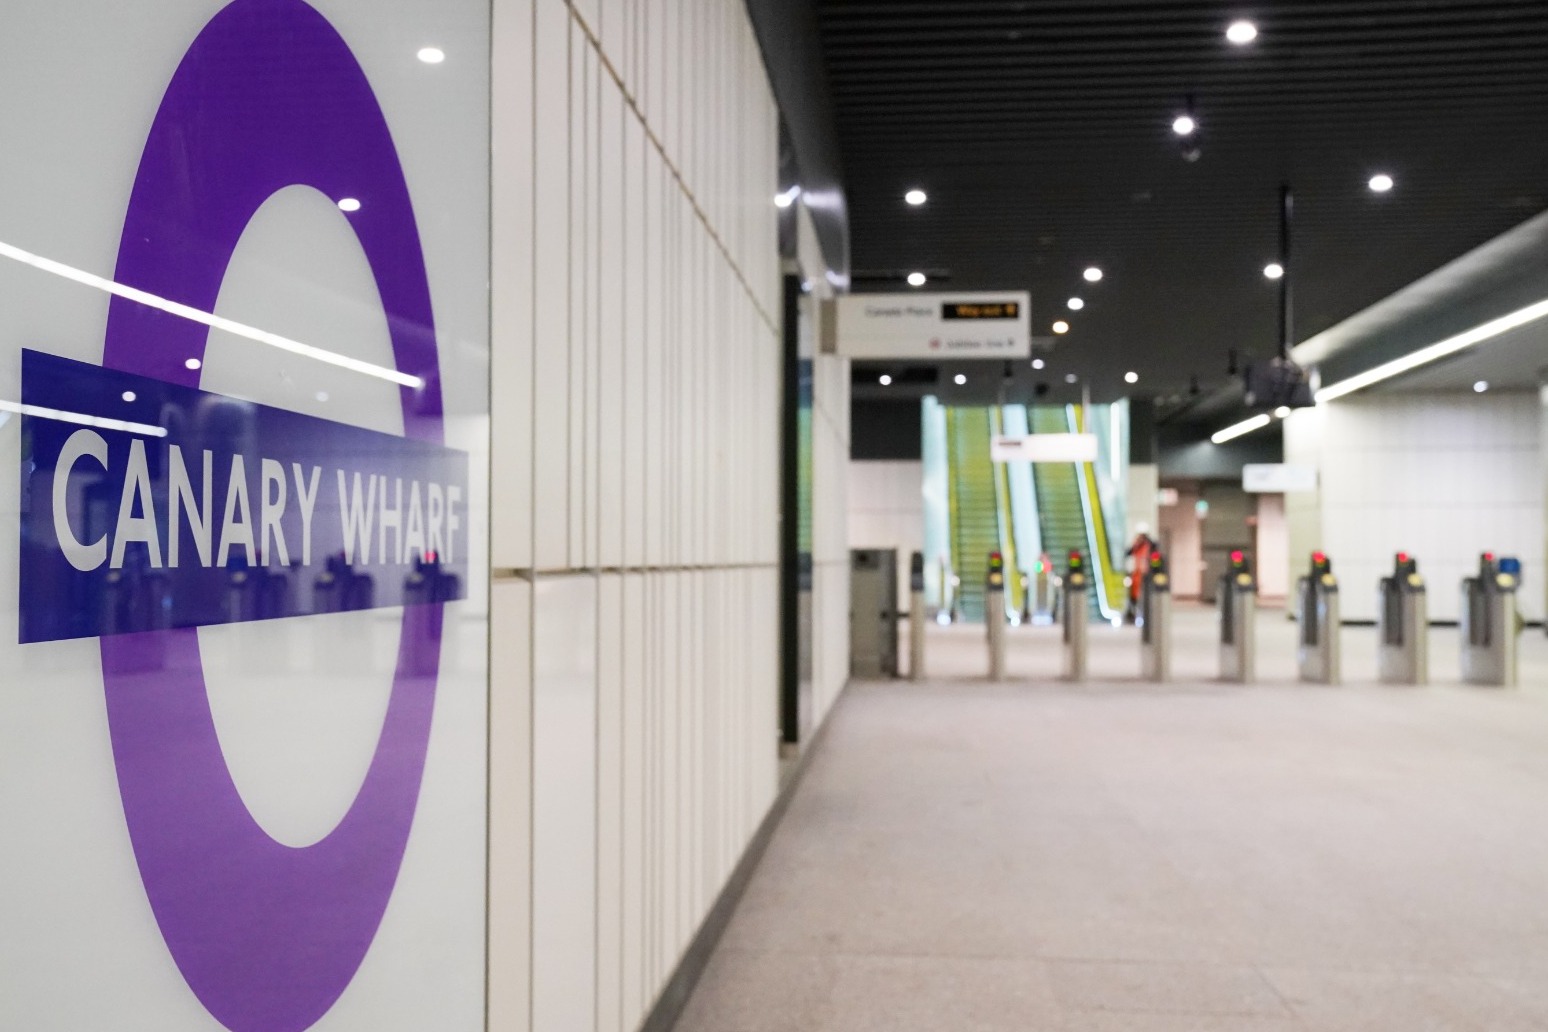 Crossrail to run empty trains for weeks to ensure flawless service